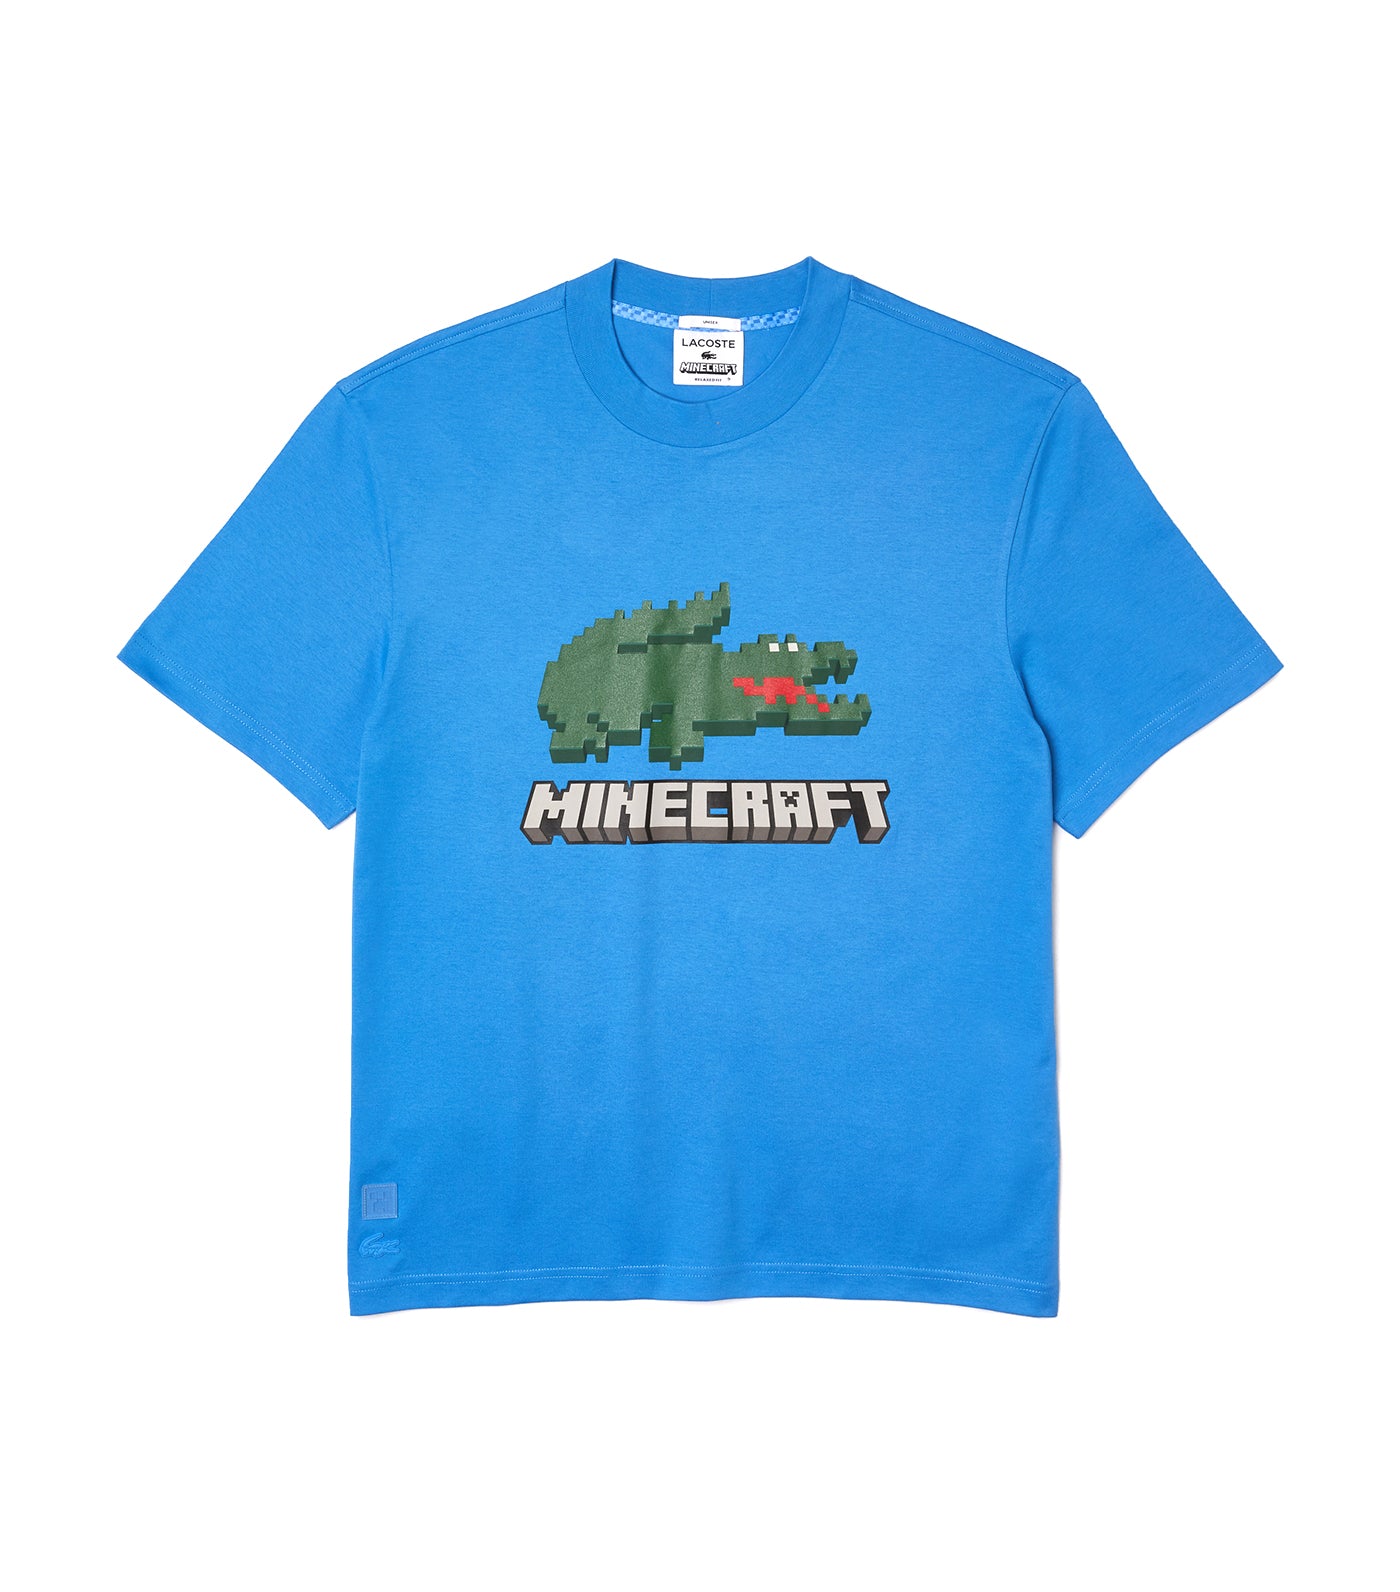 Lacoste x Minecraft Unisex Classic Fit Organic Cotton Polo Ethereal